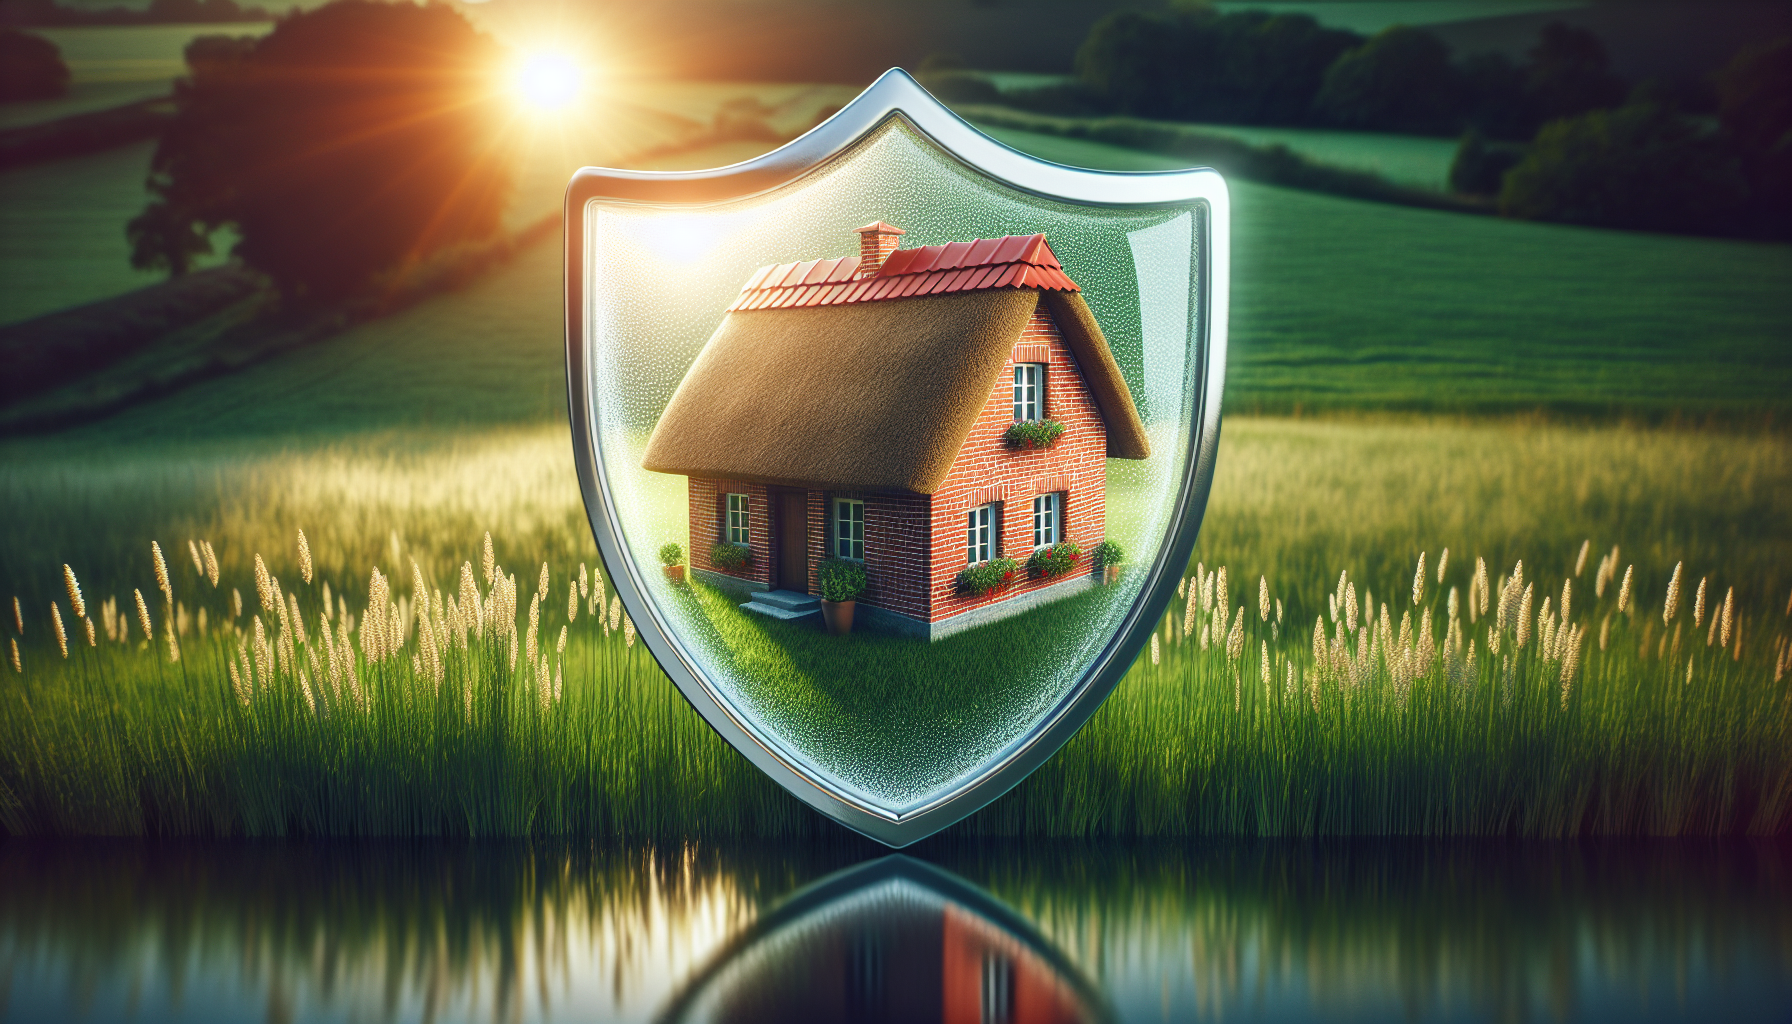 Illustration of a house covered by a protective shield